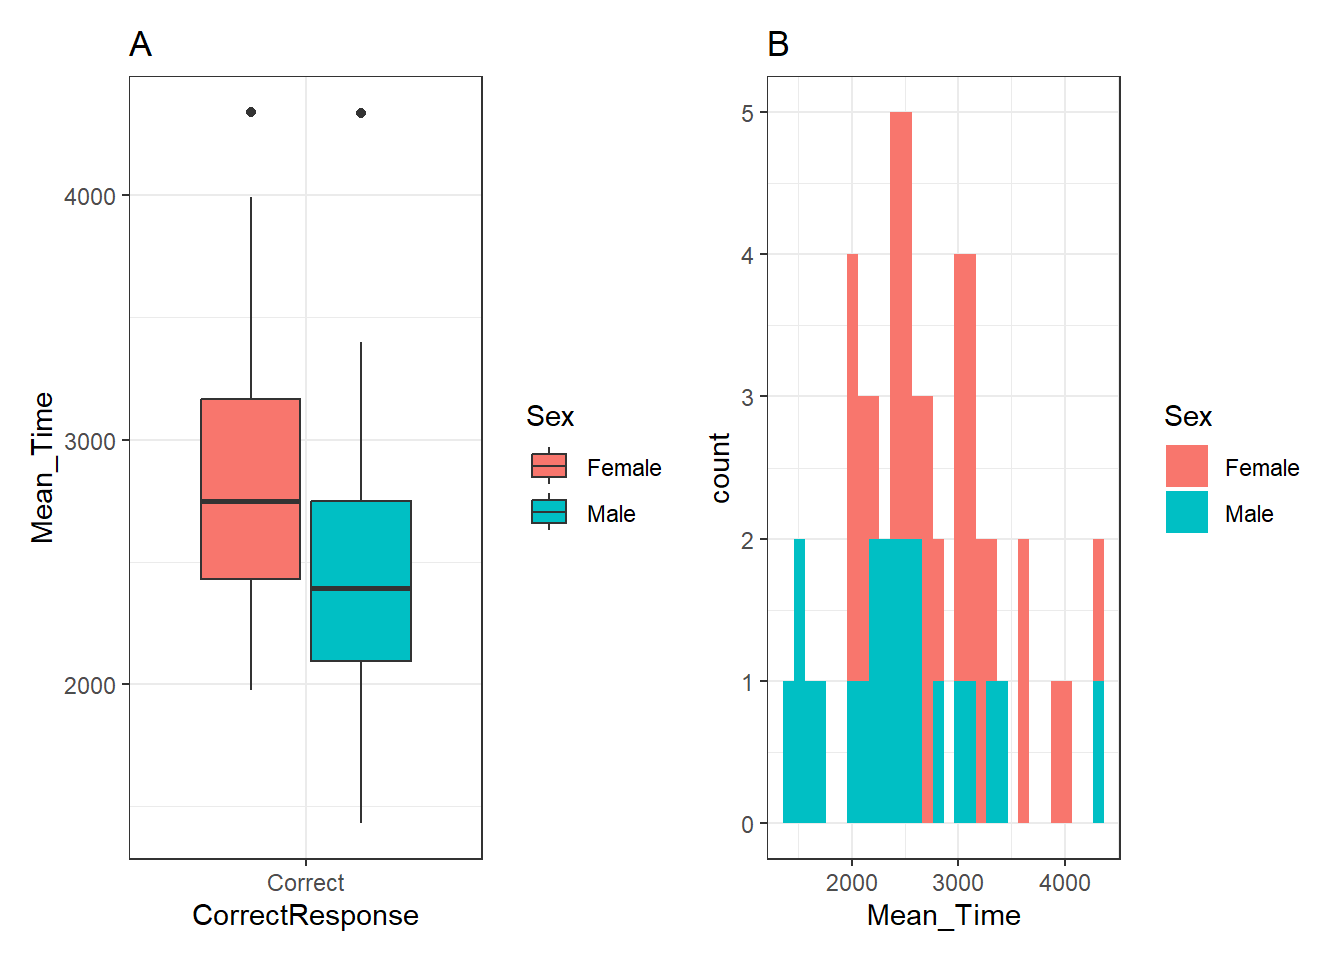 A boxplot (A - left) of the spreads of Mean Time for Correct Responses, and histogram (B - right) of distribution of Mean Time counts, both separated by Sex (female - red, male - cyan)